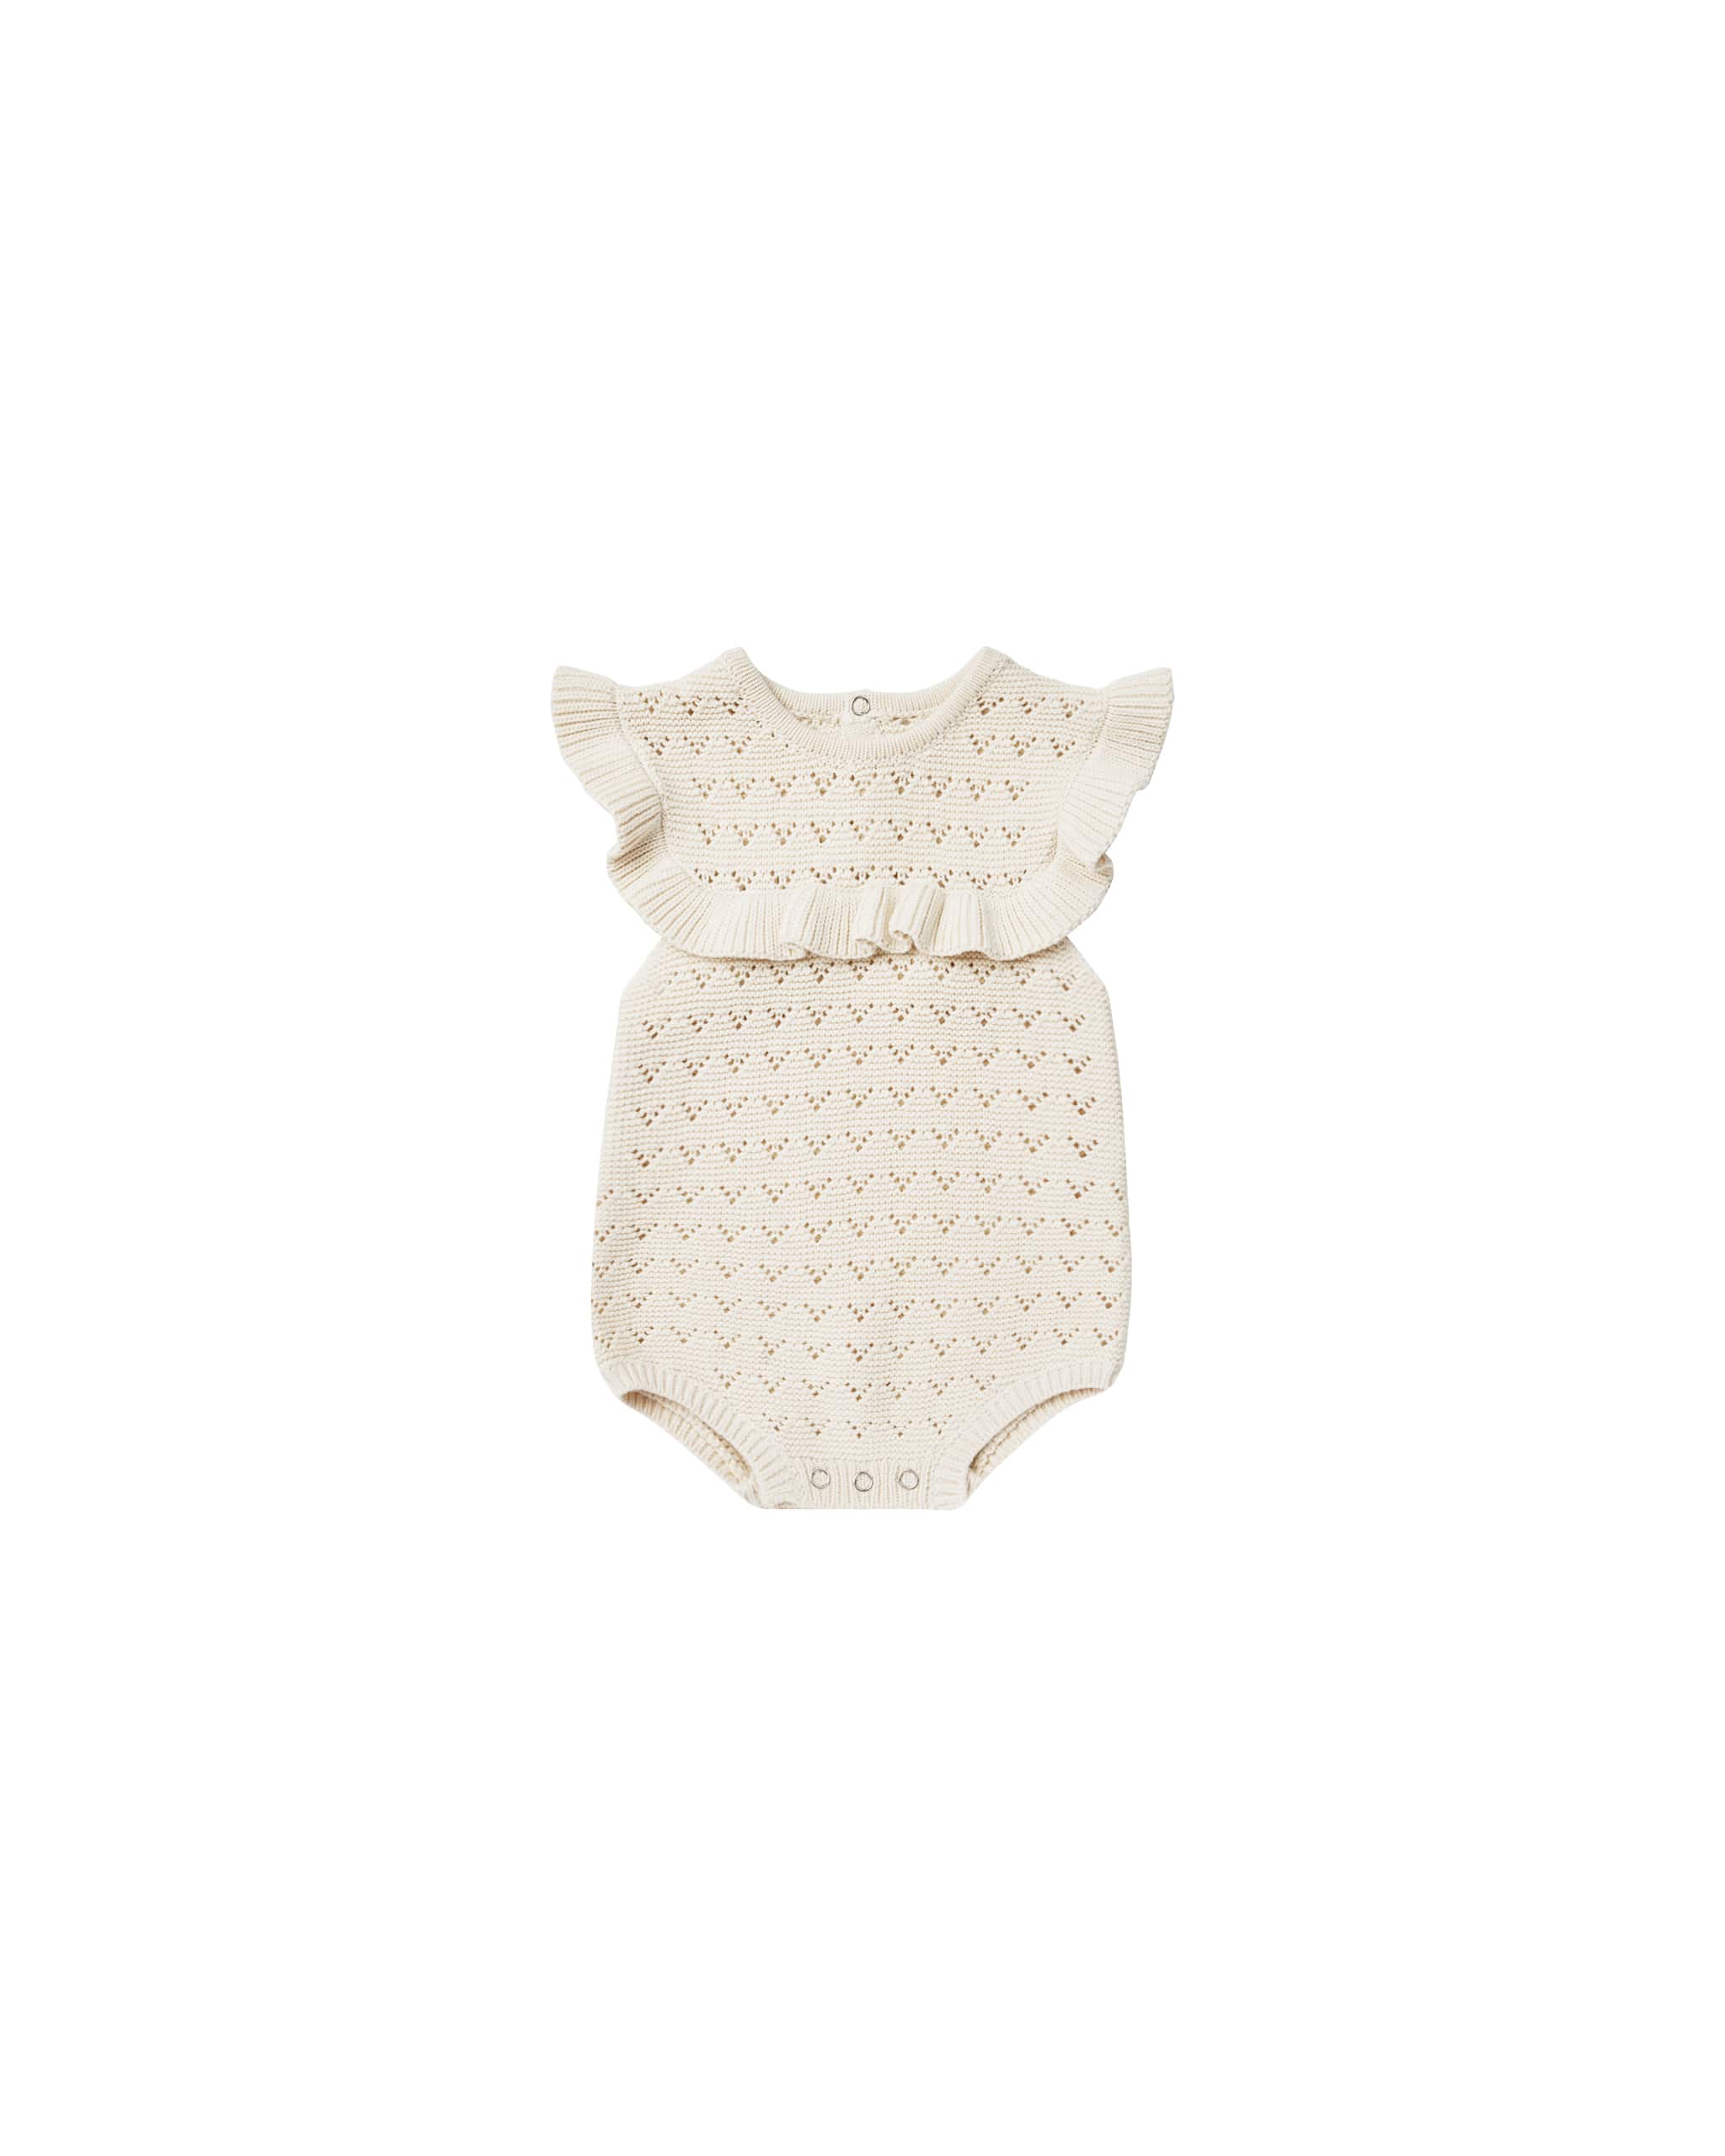 Quincy Mae Pointelle Ruffle Romper in Natural